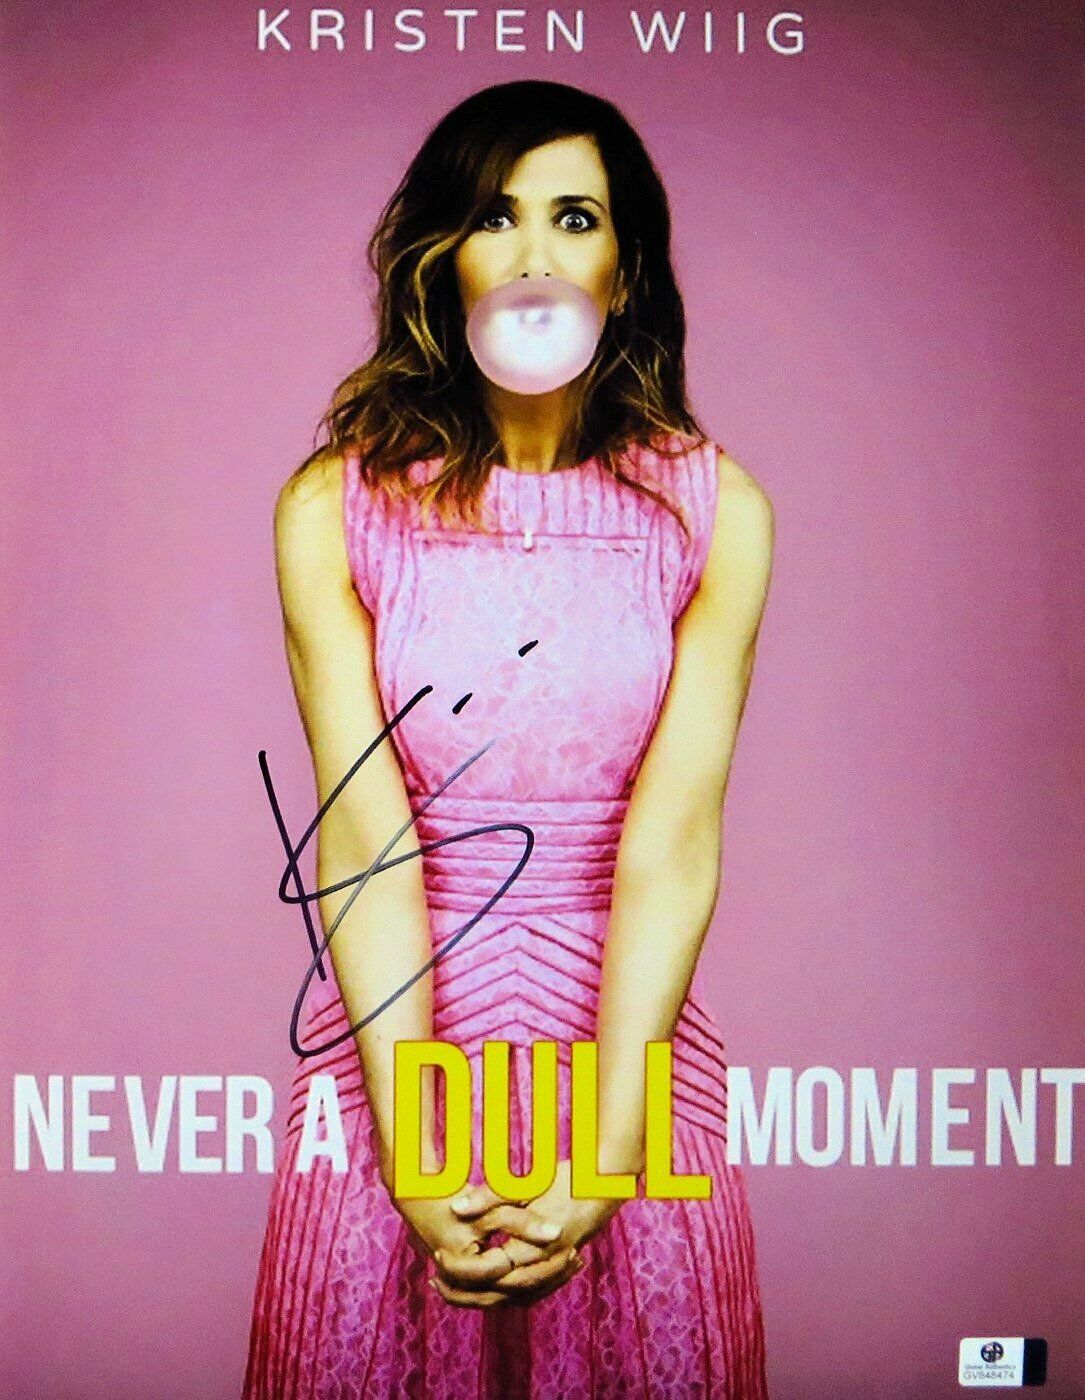 Kristen Wiig Signed Autographed 11X14 Photo Poster painting Blowing Bubble GV848474